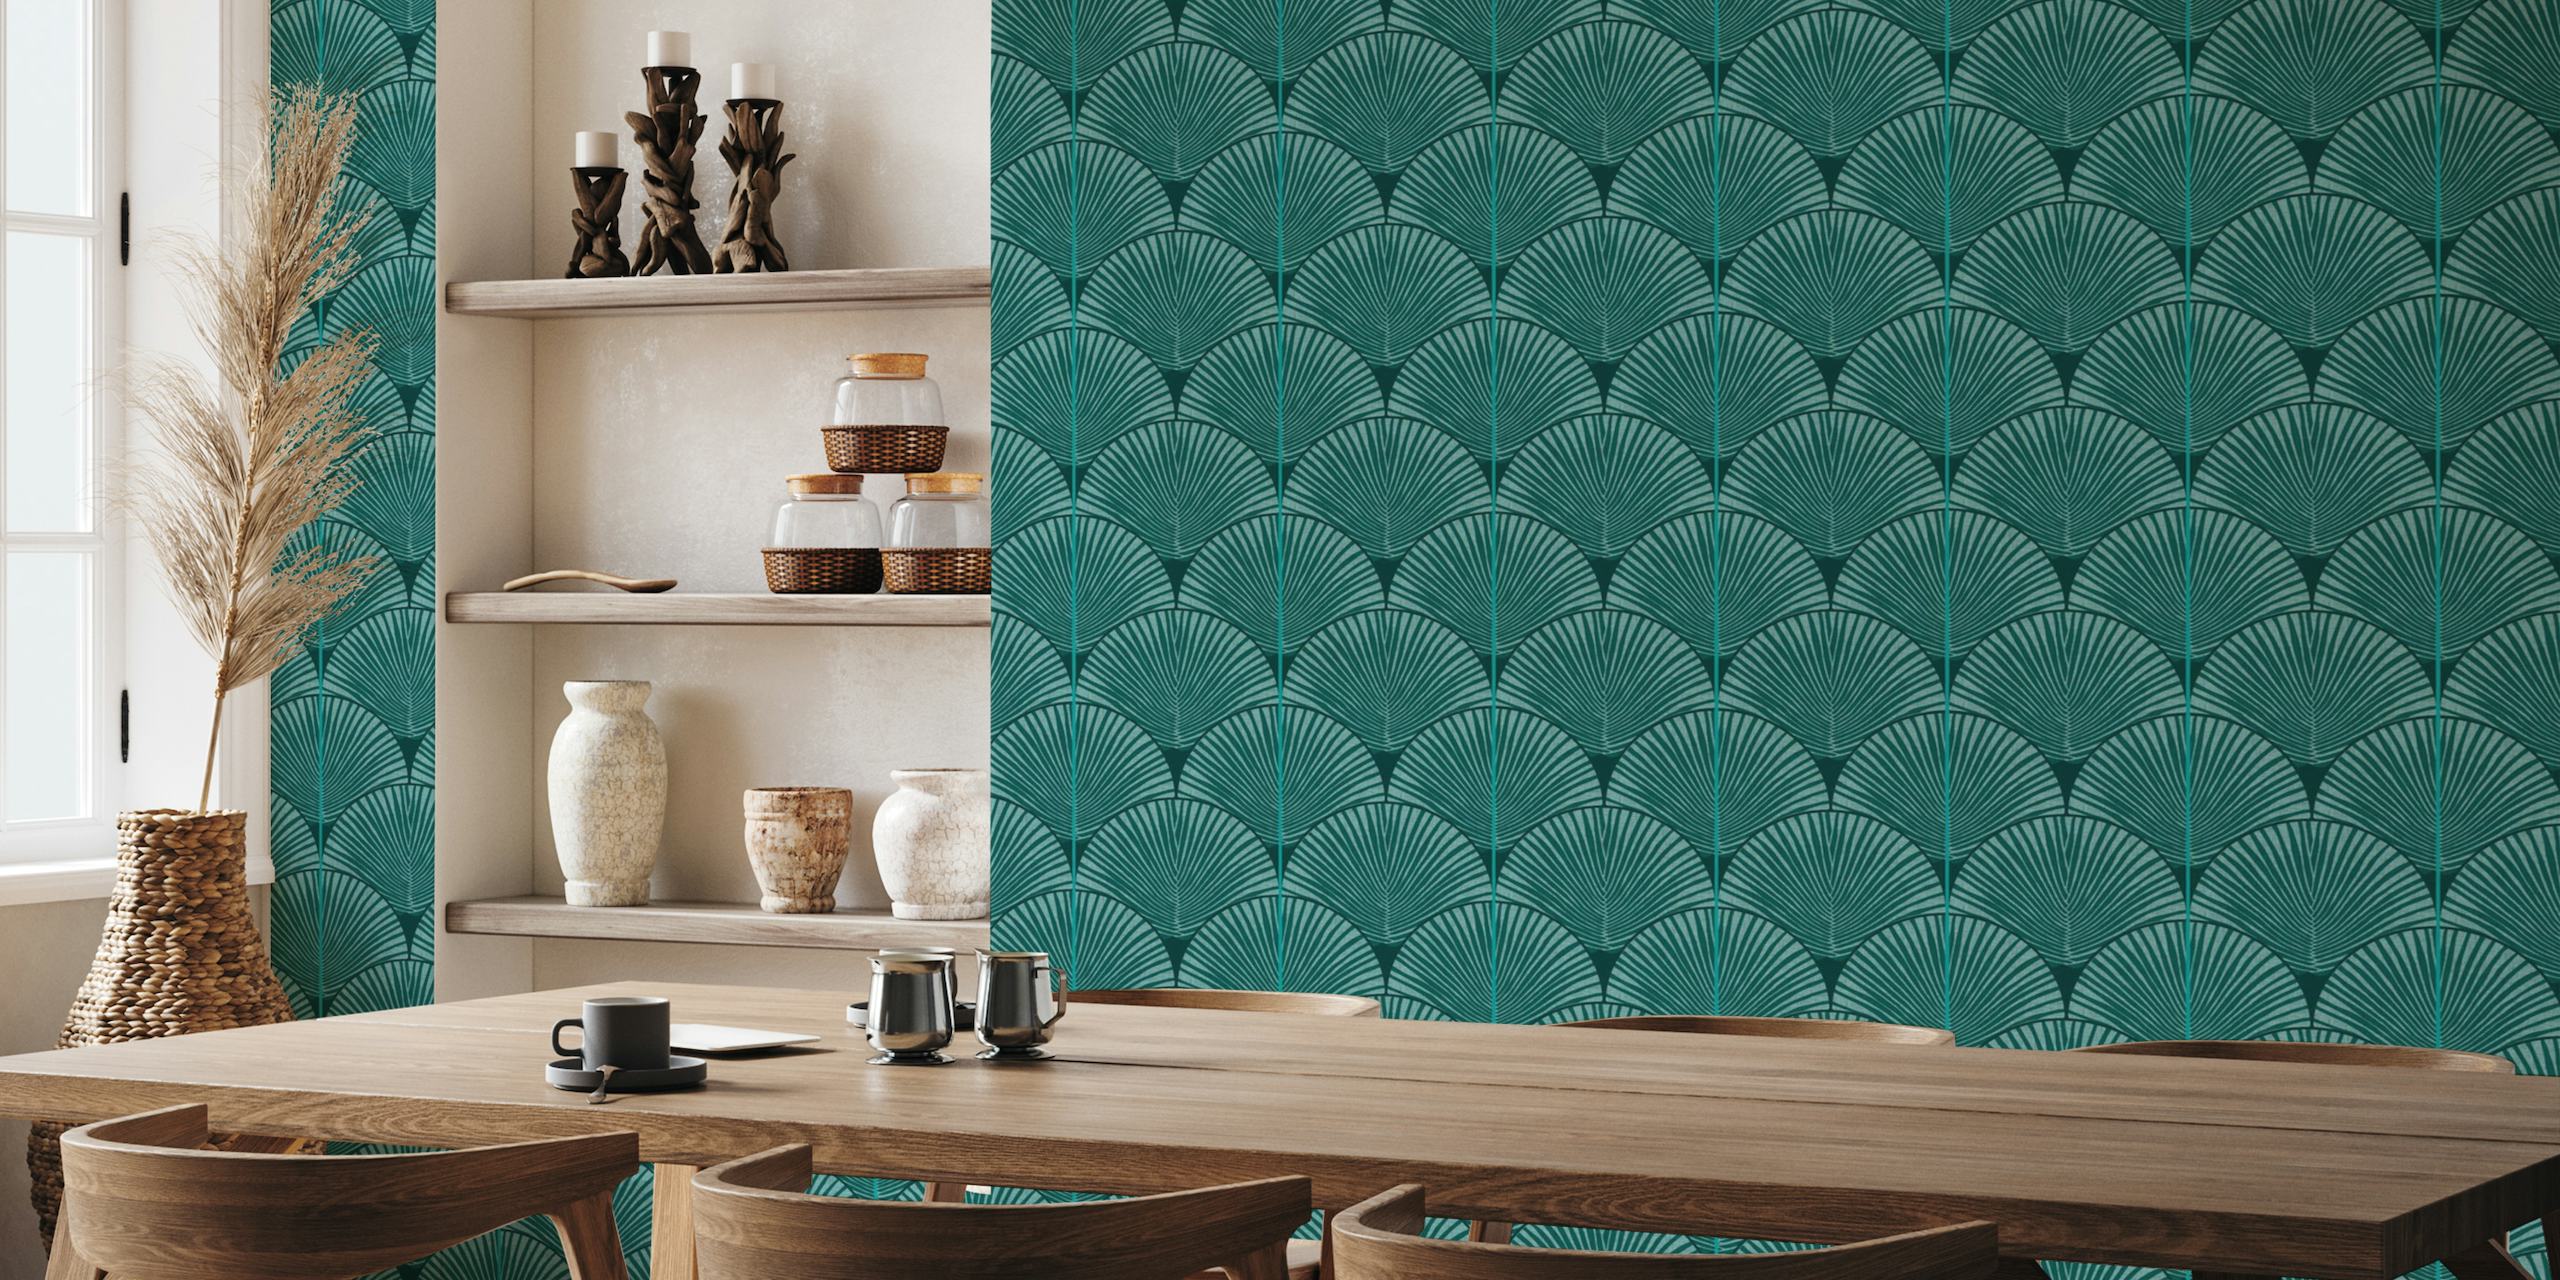 Japandi Palms Teal wall mural featuring stylized palm designs in teal color